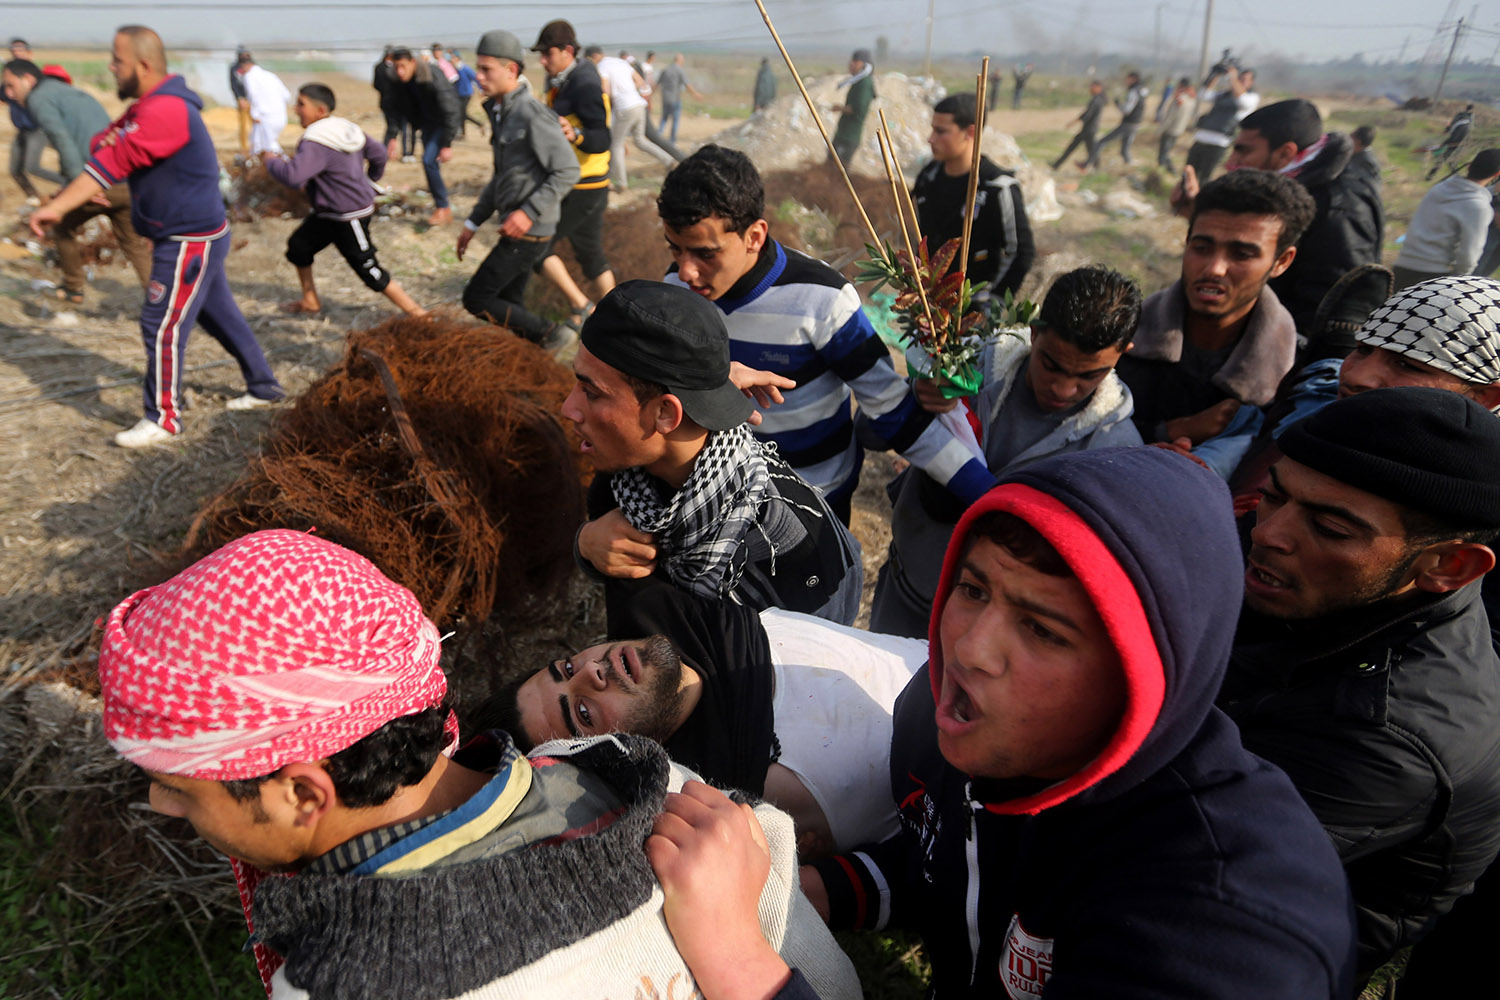 Jan. 17, 2014. Palestinians carry a wounded protester during clashes with Israeli security forces following a protest in Nahal Oz, east of Gaza City.